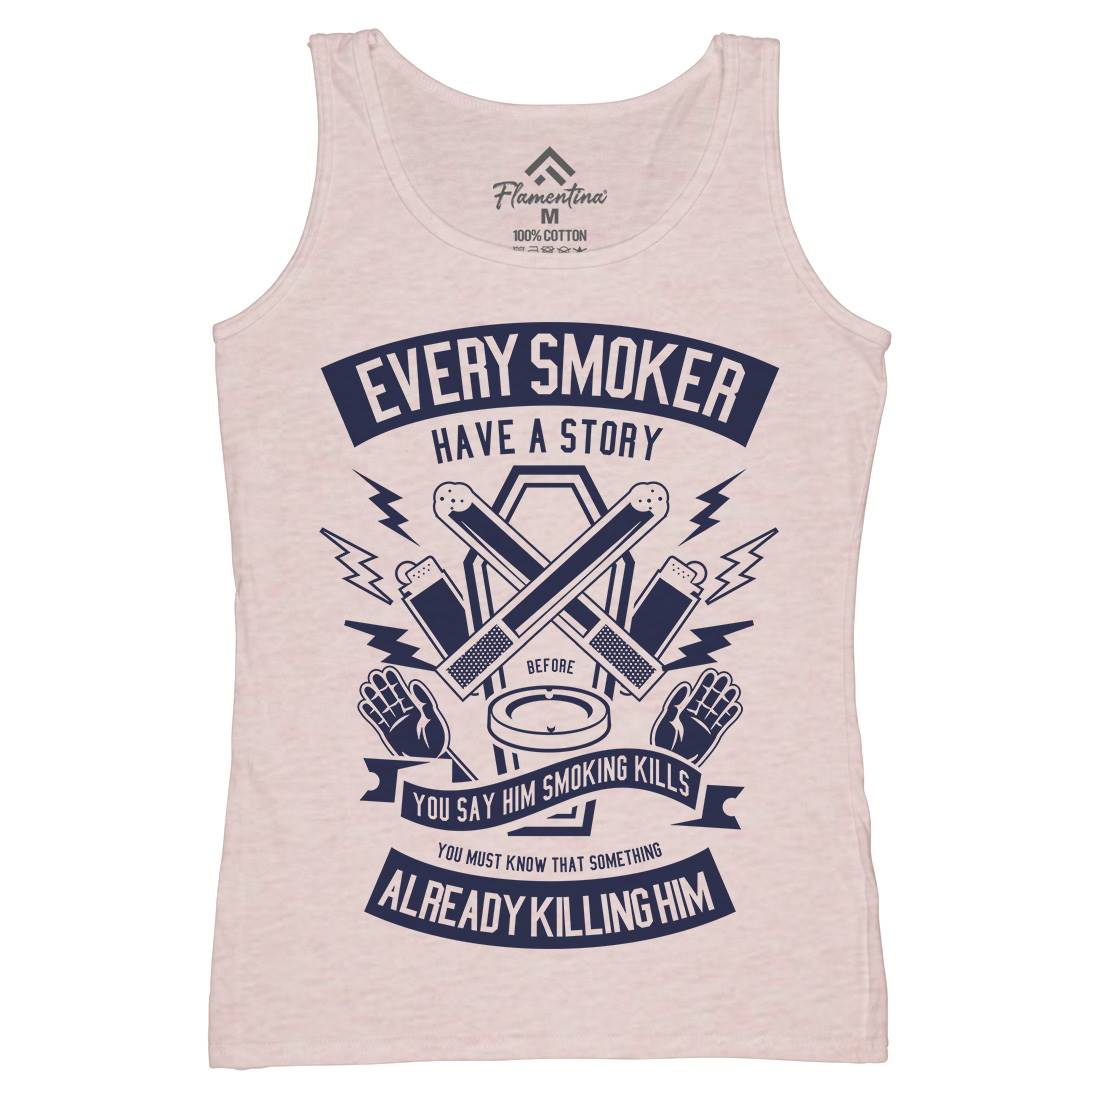 Every Smoker Womens Organic Tank Top Vest Quotes A227